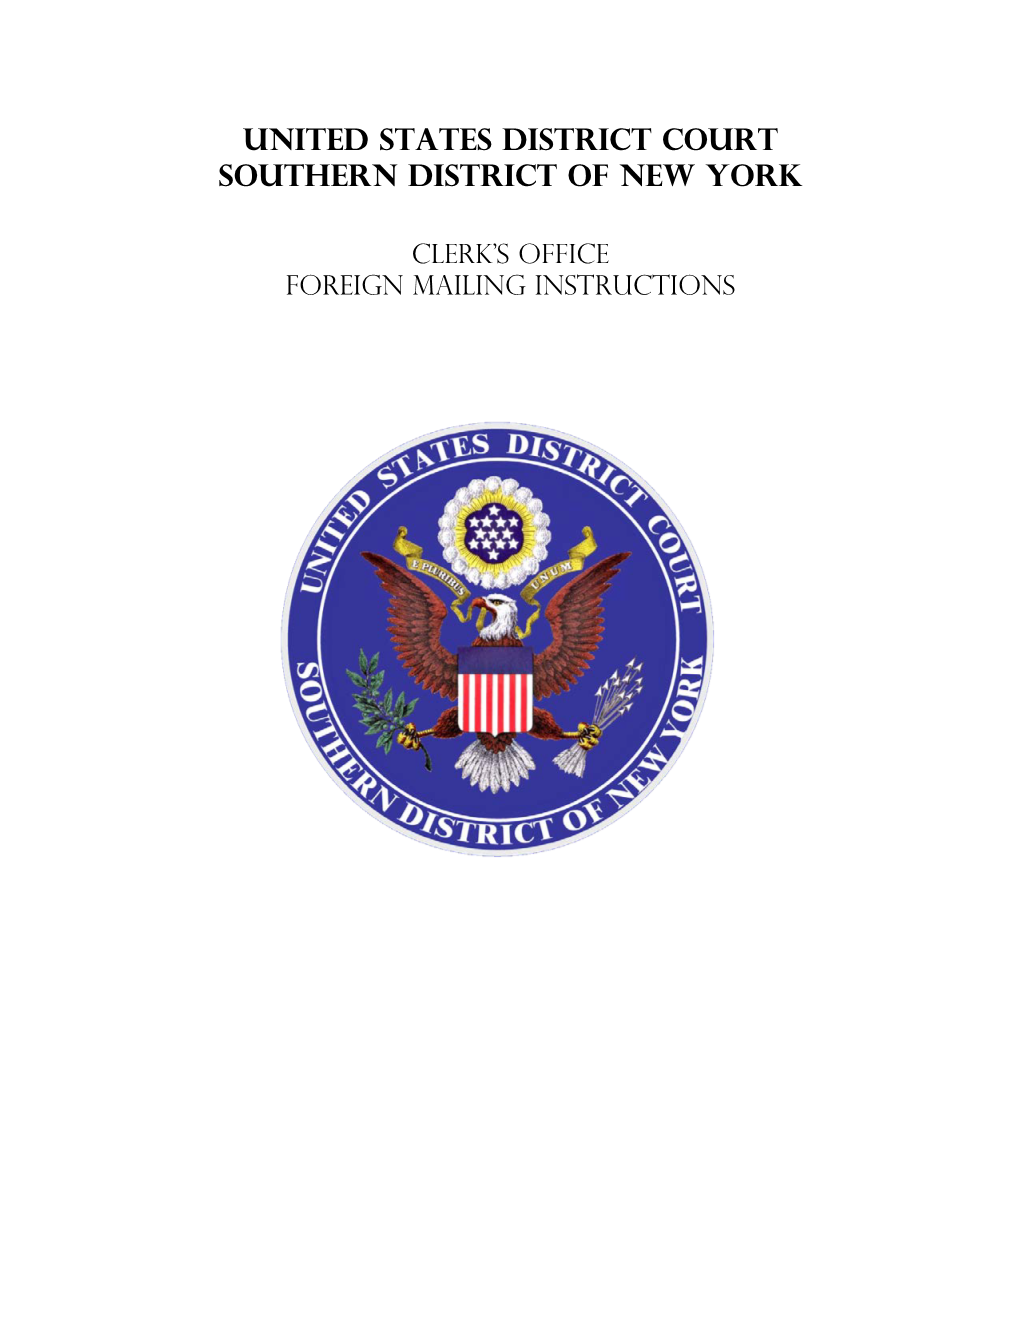 United States District Court Southern District of New York